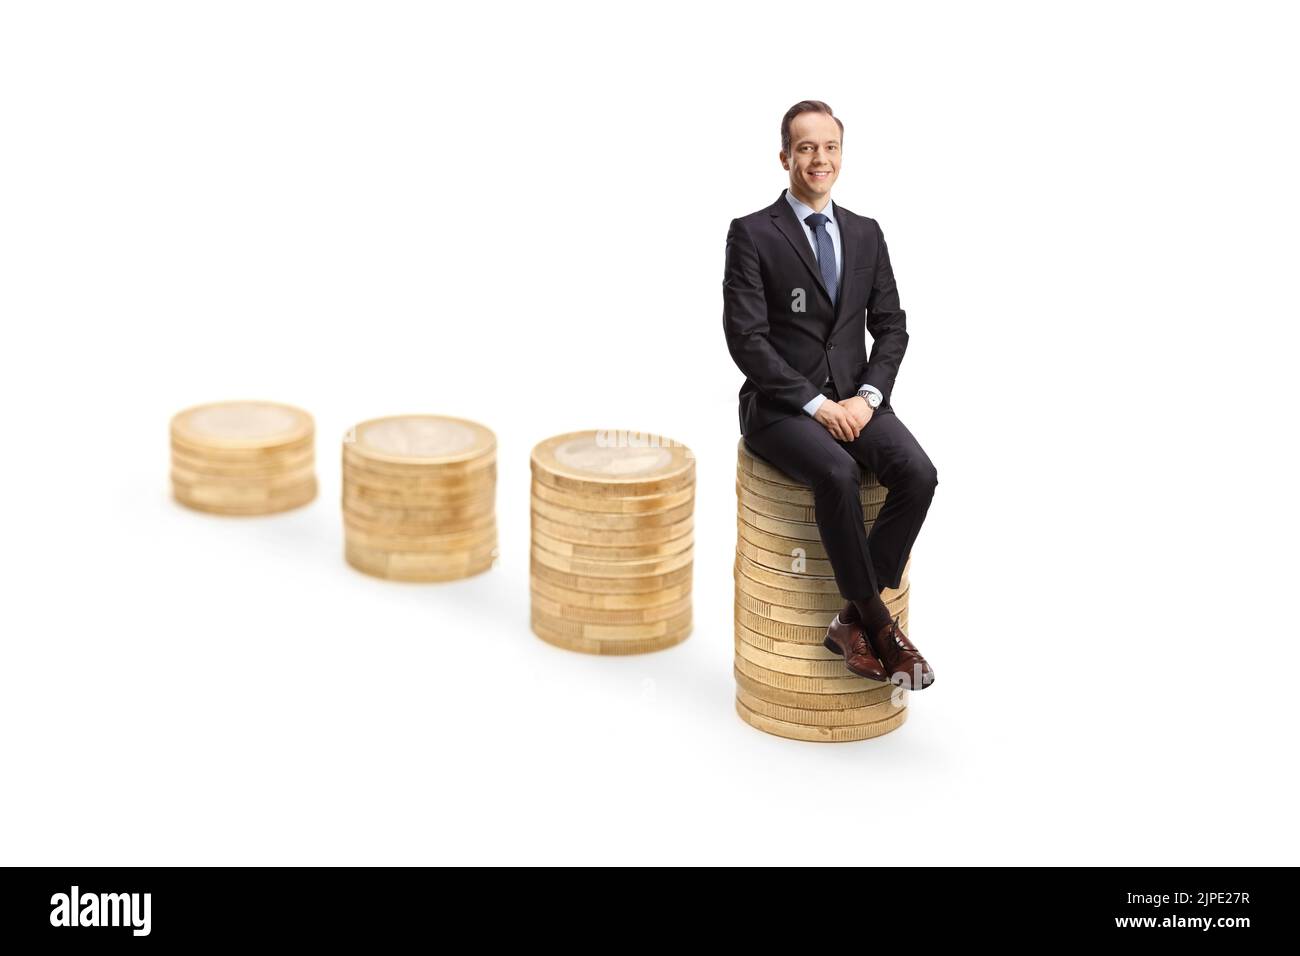 Professional man in suit and tie sitting on a pile of coins and looking at camera isolated on white background Stock Photo